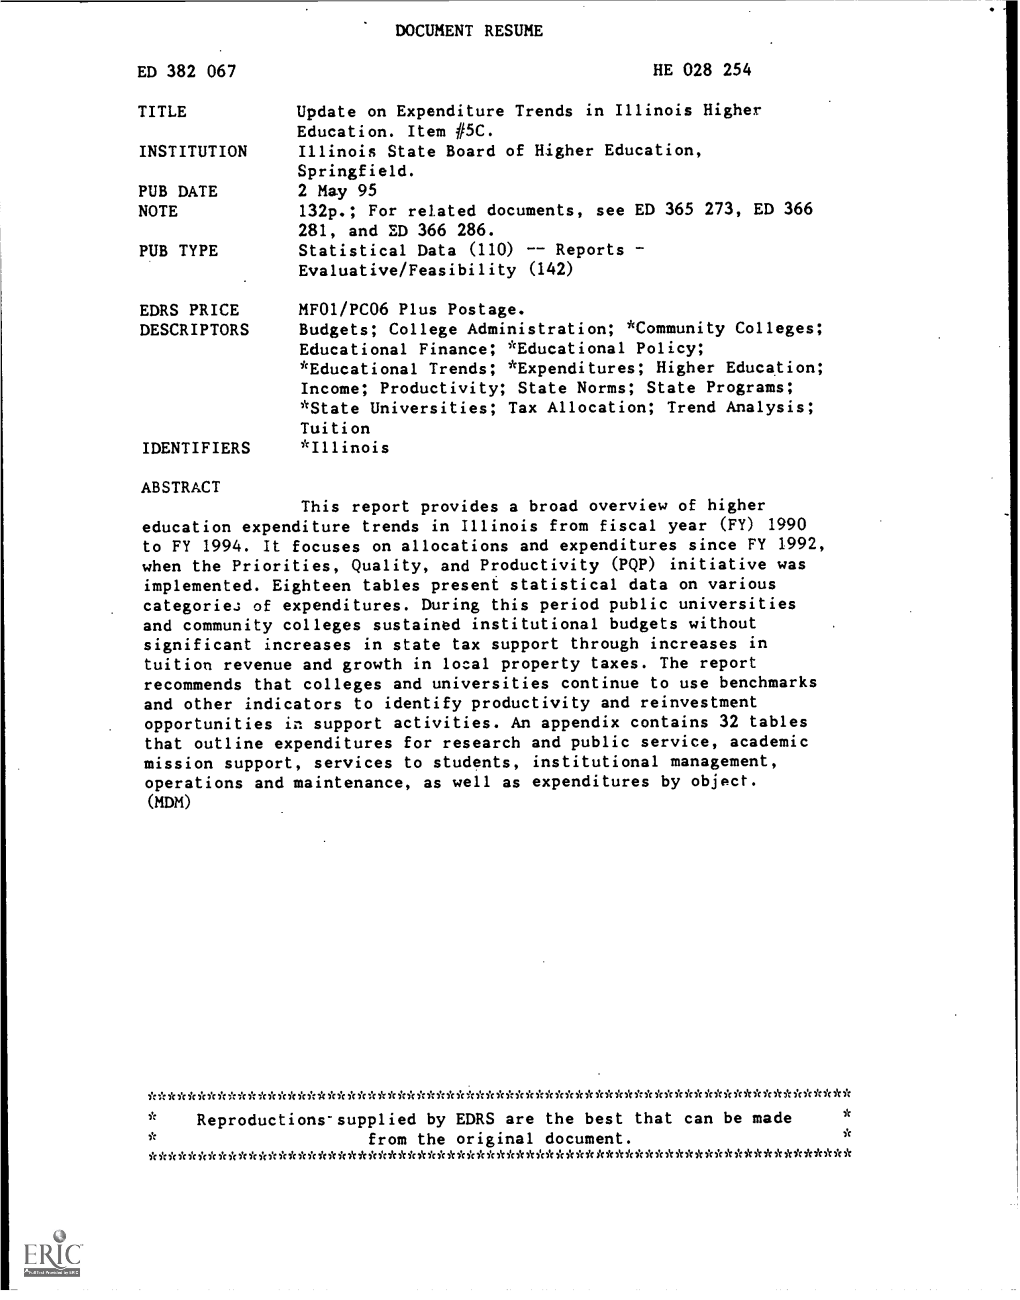 DOCUMENT RESUME ED 382 067 HE 028 254 TITLE Update On